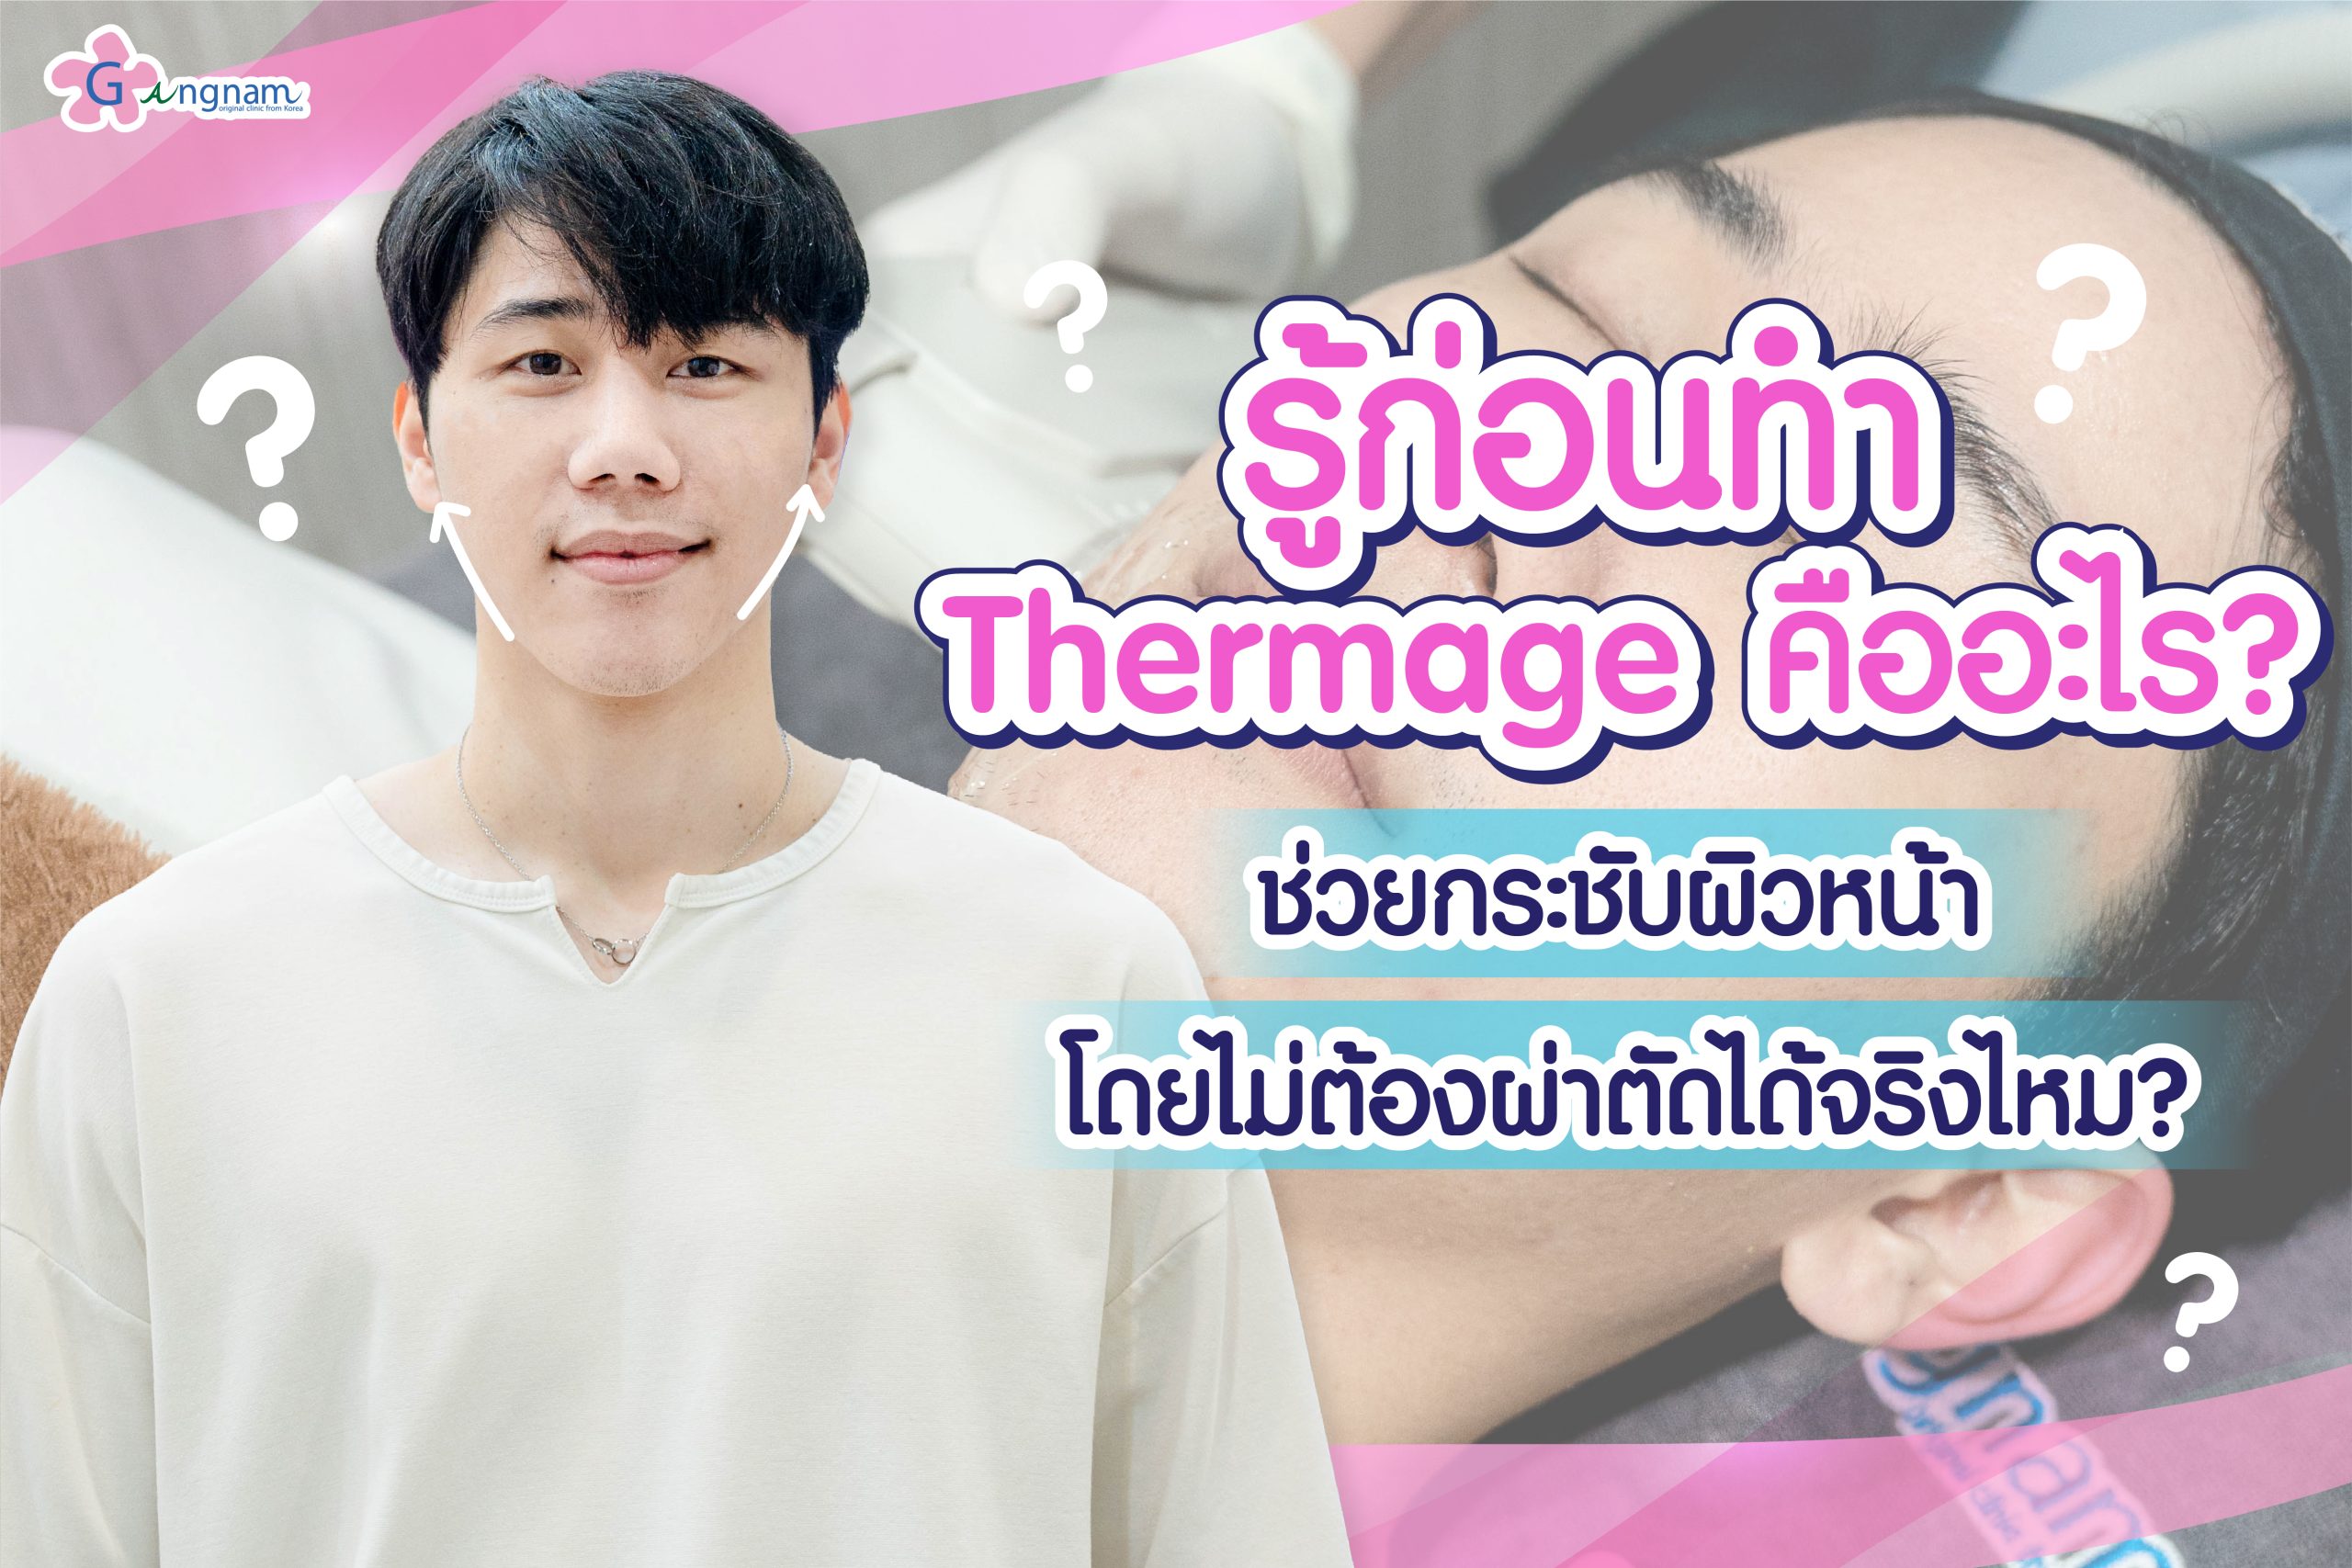 Thermage คืออะไร?